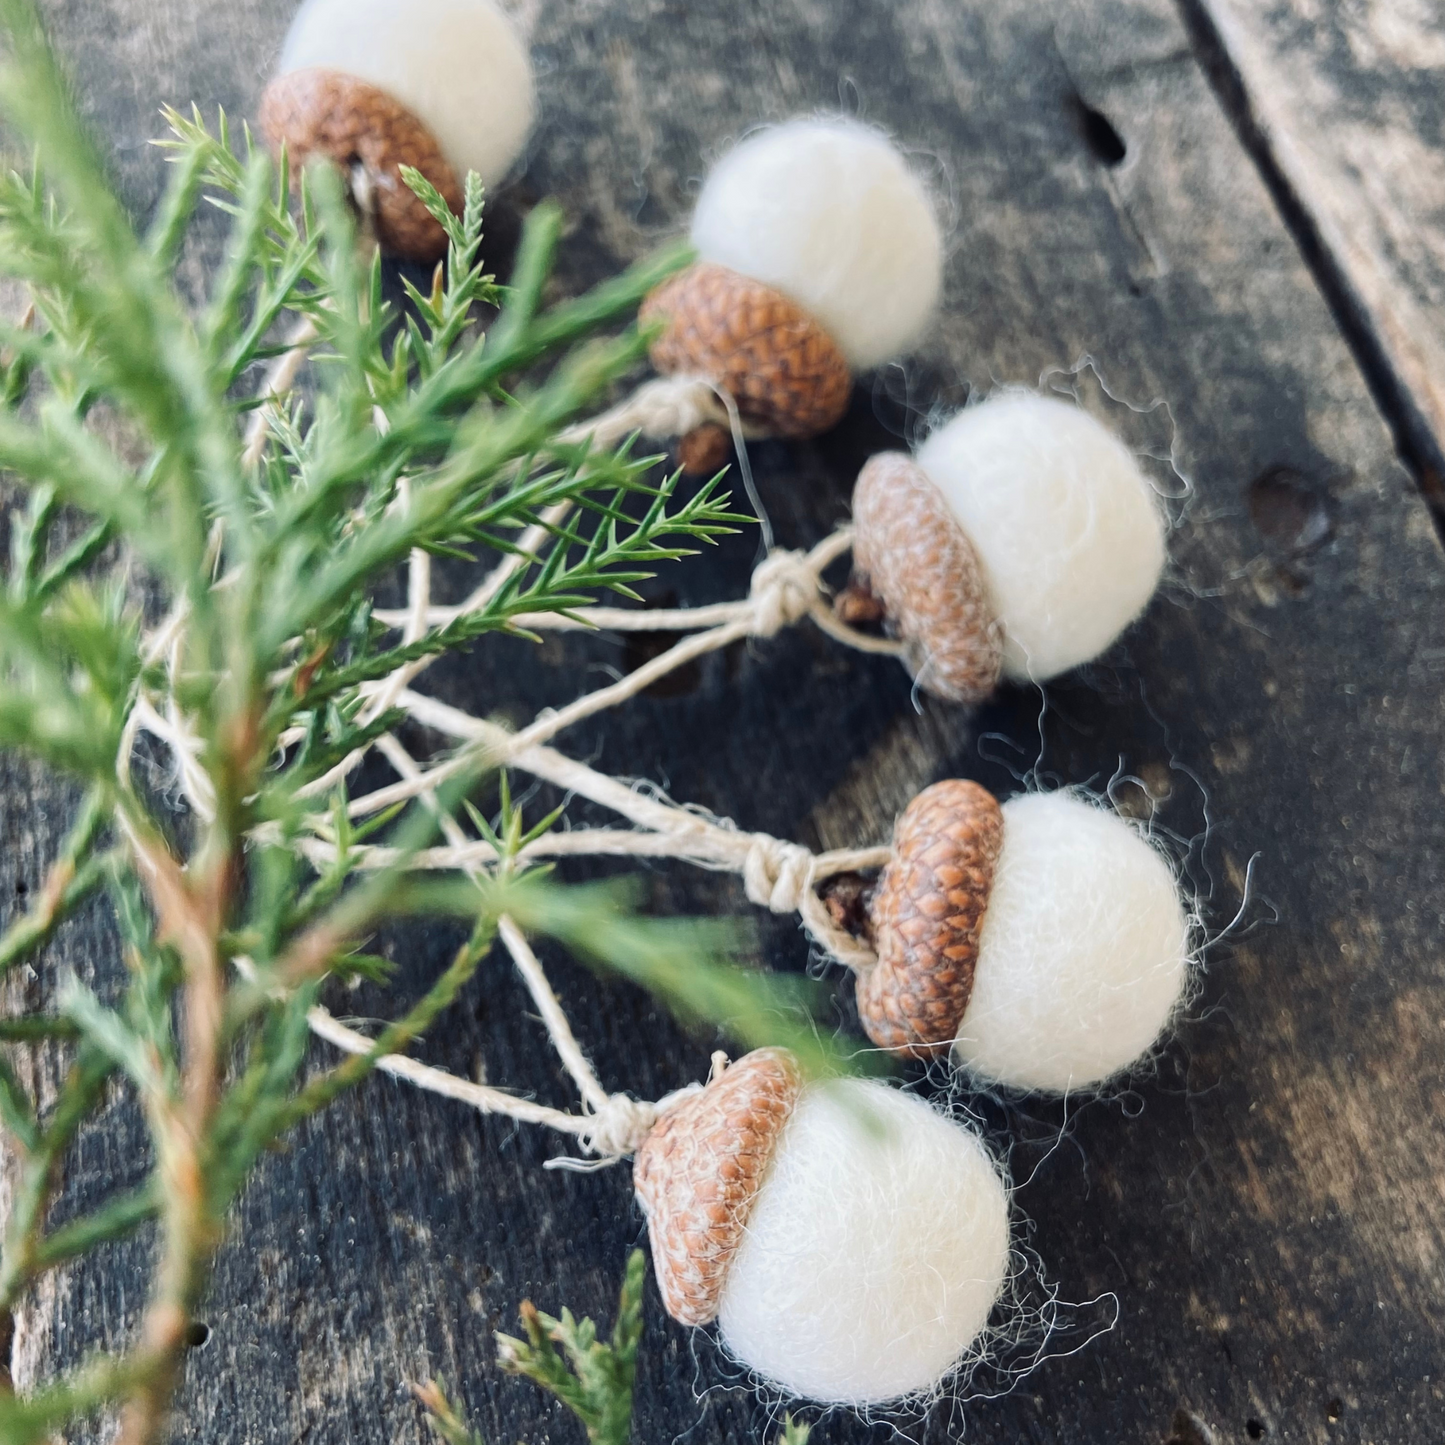 Felted Wool Acorn Ornaments with Red Oak Caps & Natural Hemp. Ivory or Tan